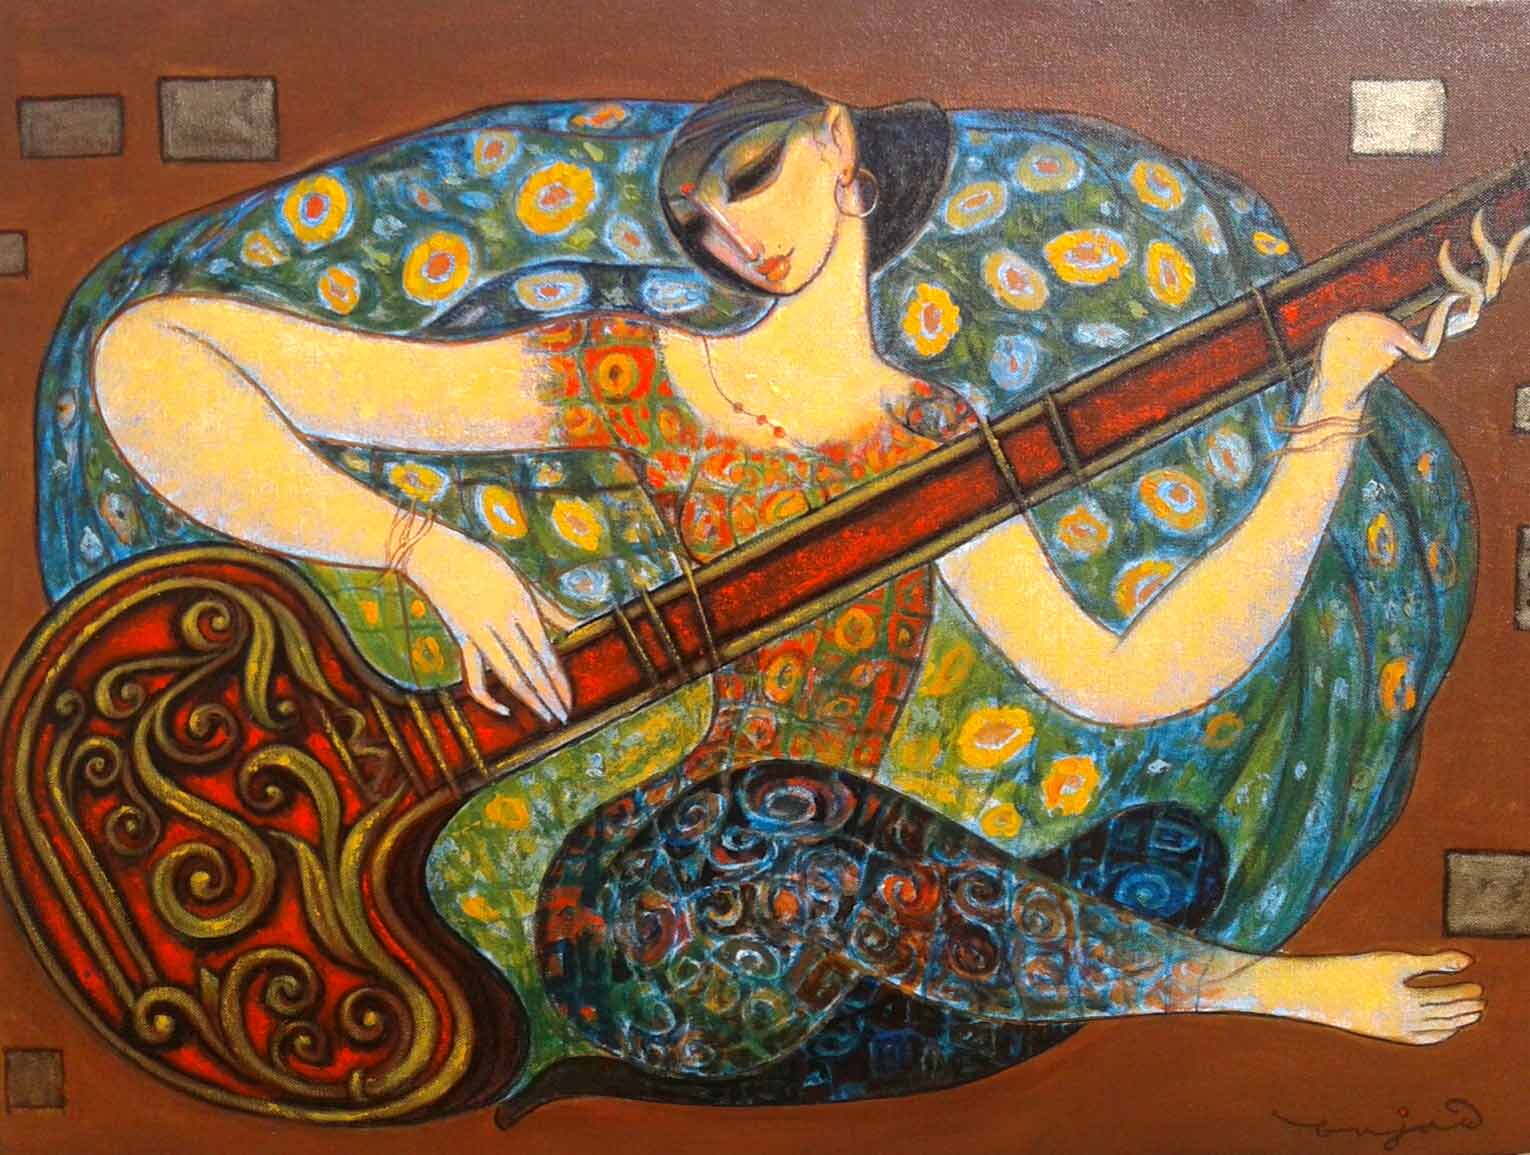 Figurative Painting with Acrylic on Canvas "Sitar-14" art by Ramesh P Gujar